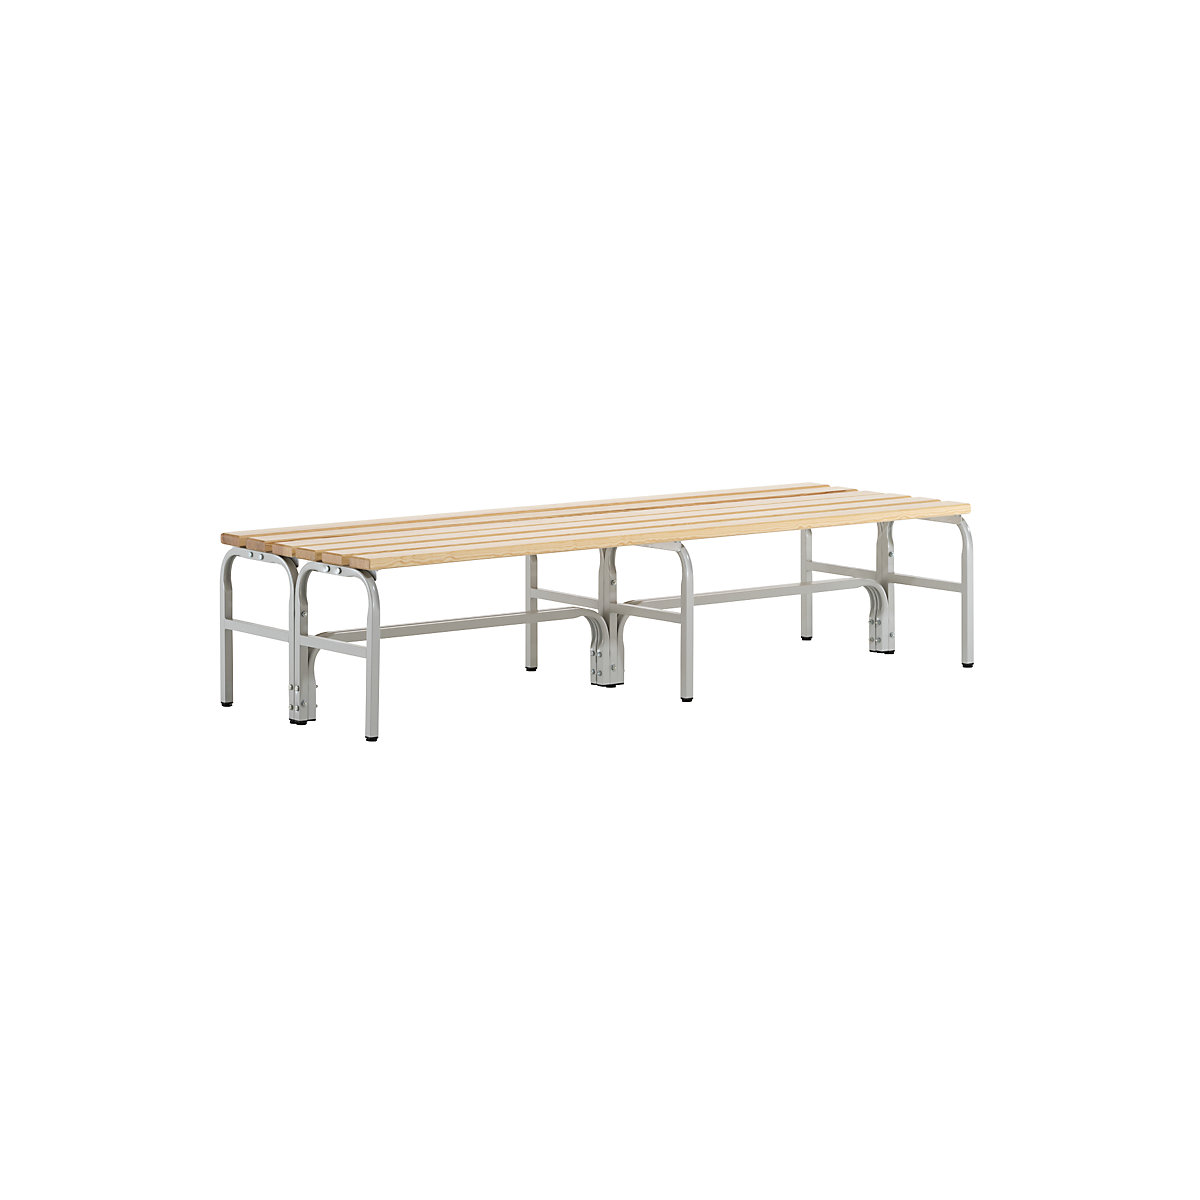 Sypro – Cloakroom bench, double sided, pine wood slats, length 2000 mm